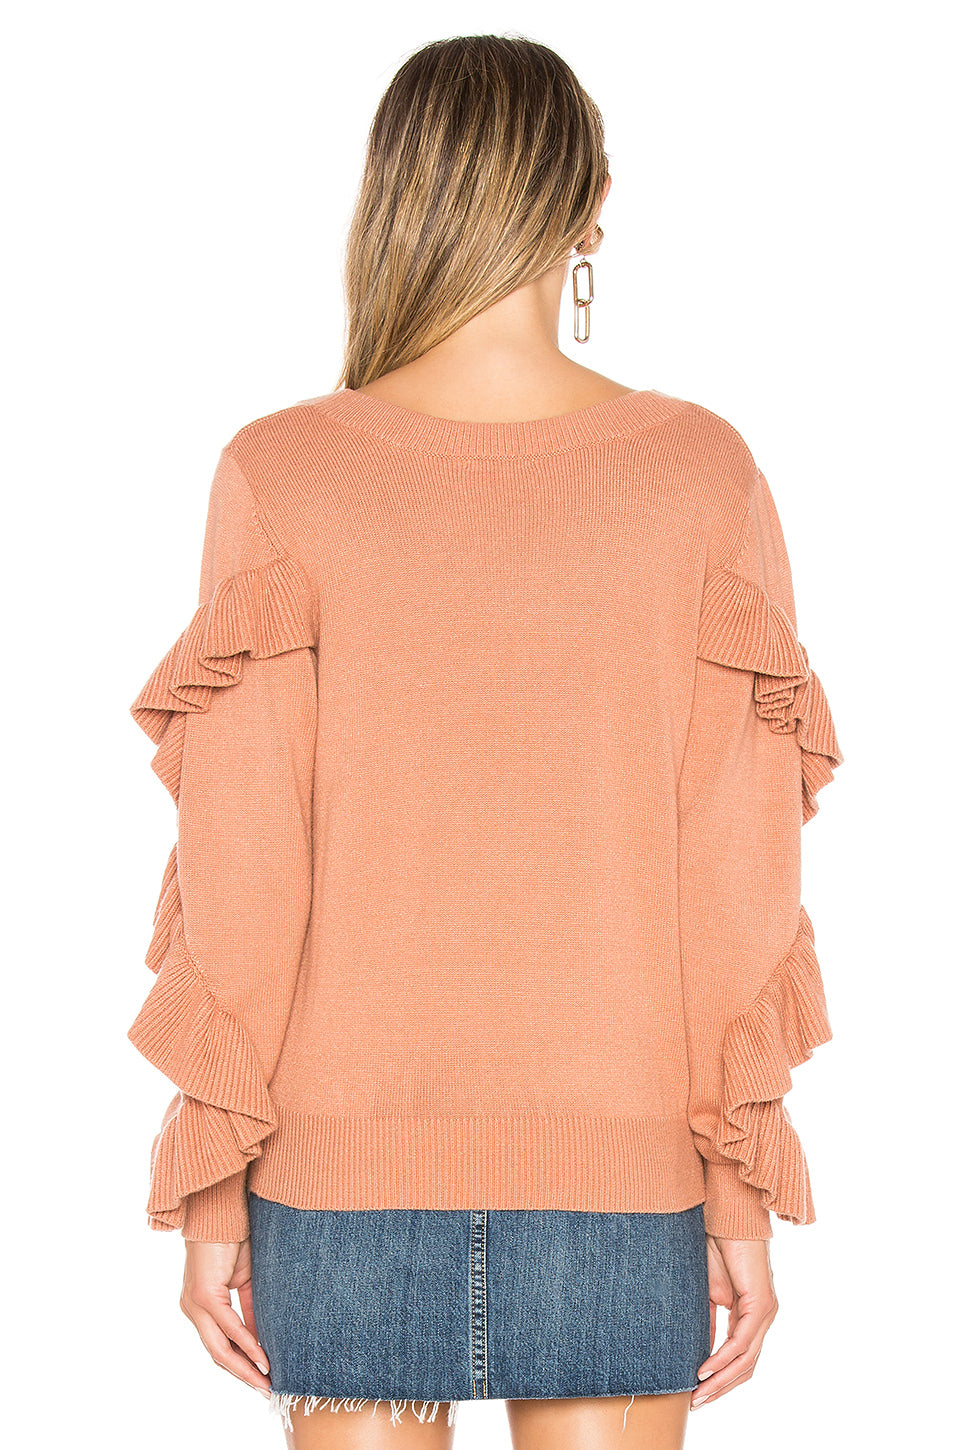 Florence Sweater in DUSTY PINK